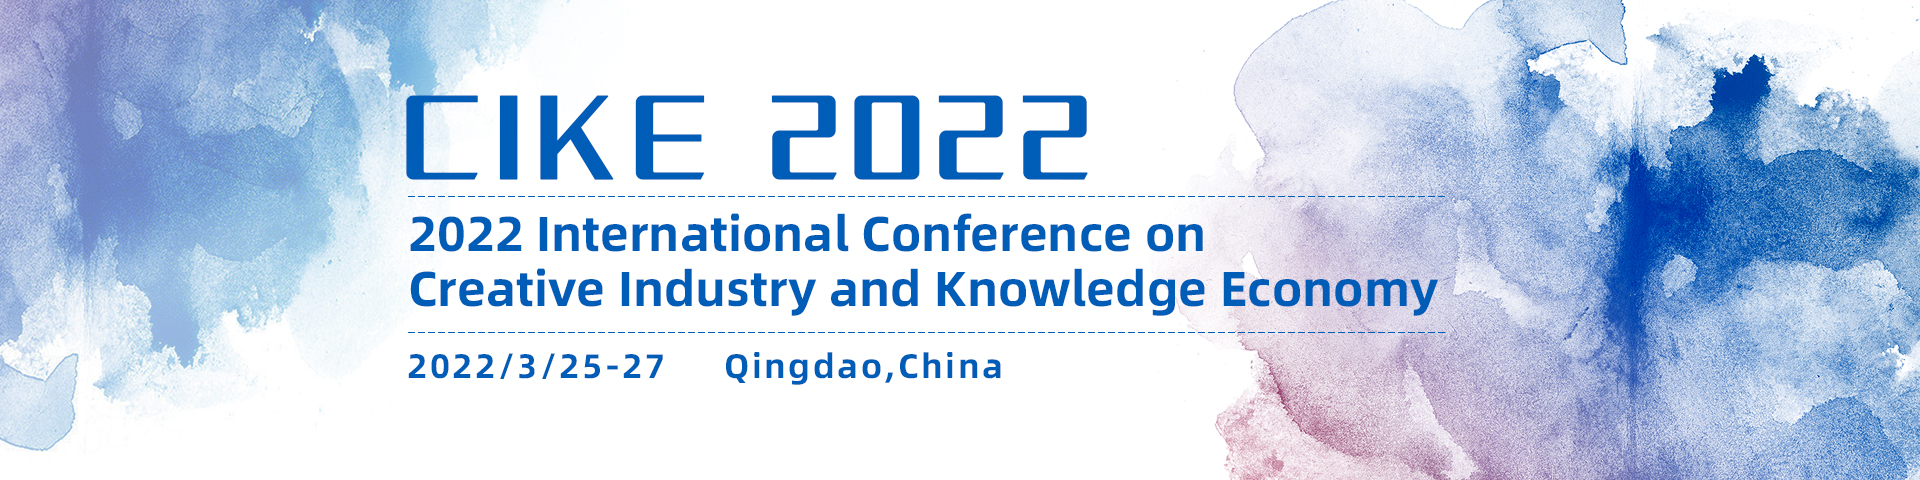 2022 International Conference on Creative Industry and Knowledge Economy (CIKE 2022), Qingdao, Shandong, China